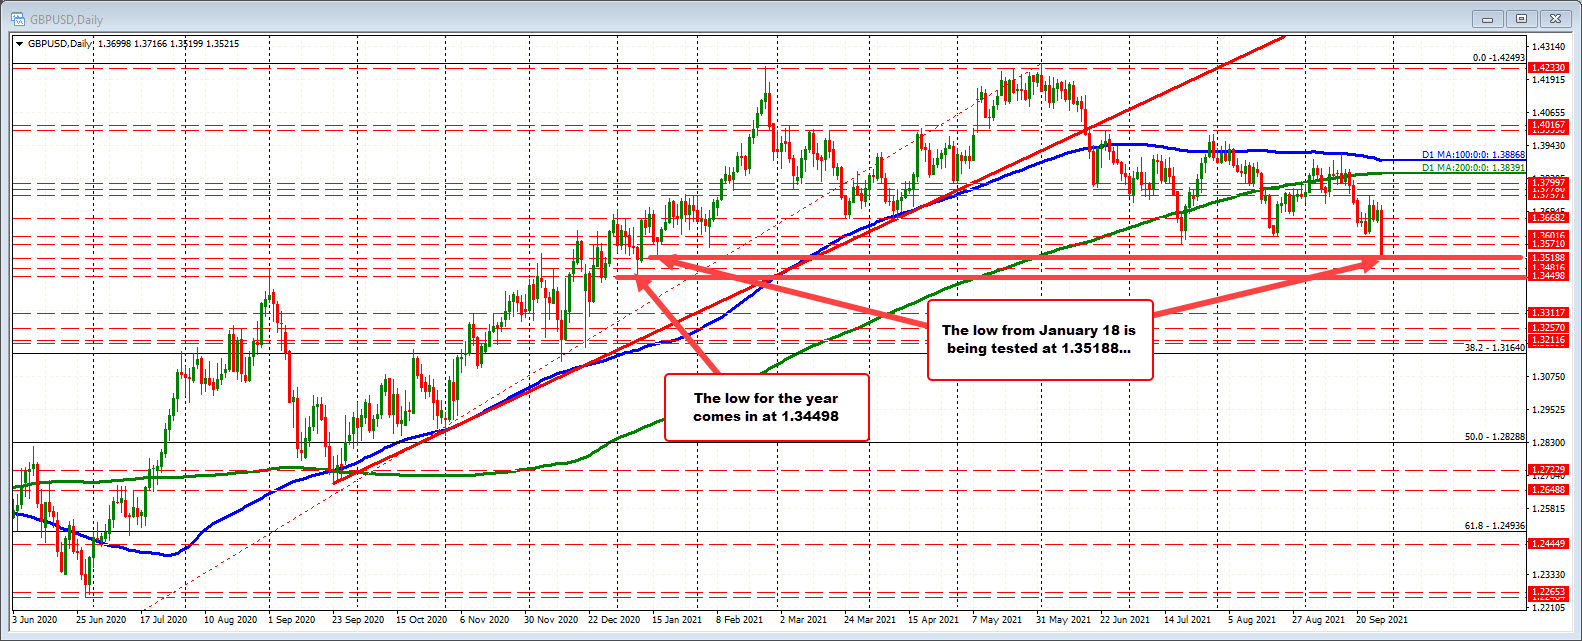 New lows in the GBPUSD and gets closer to the January 18 swing low at 1.35188. 